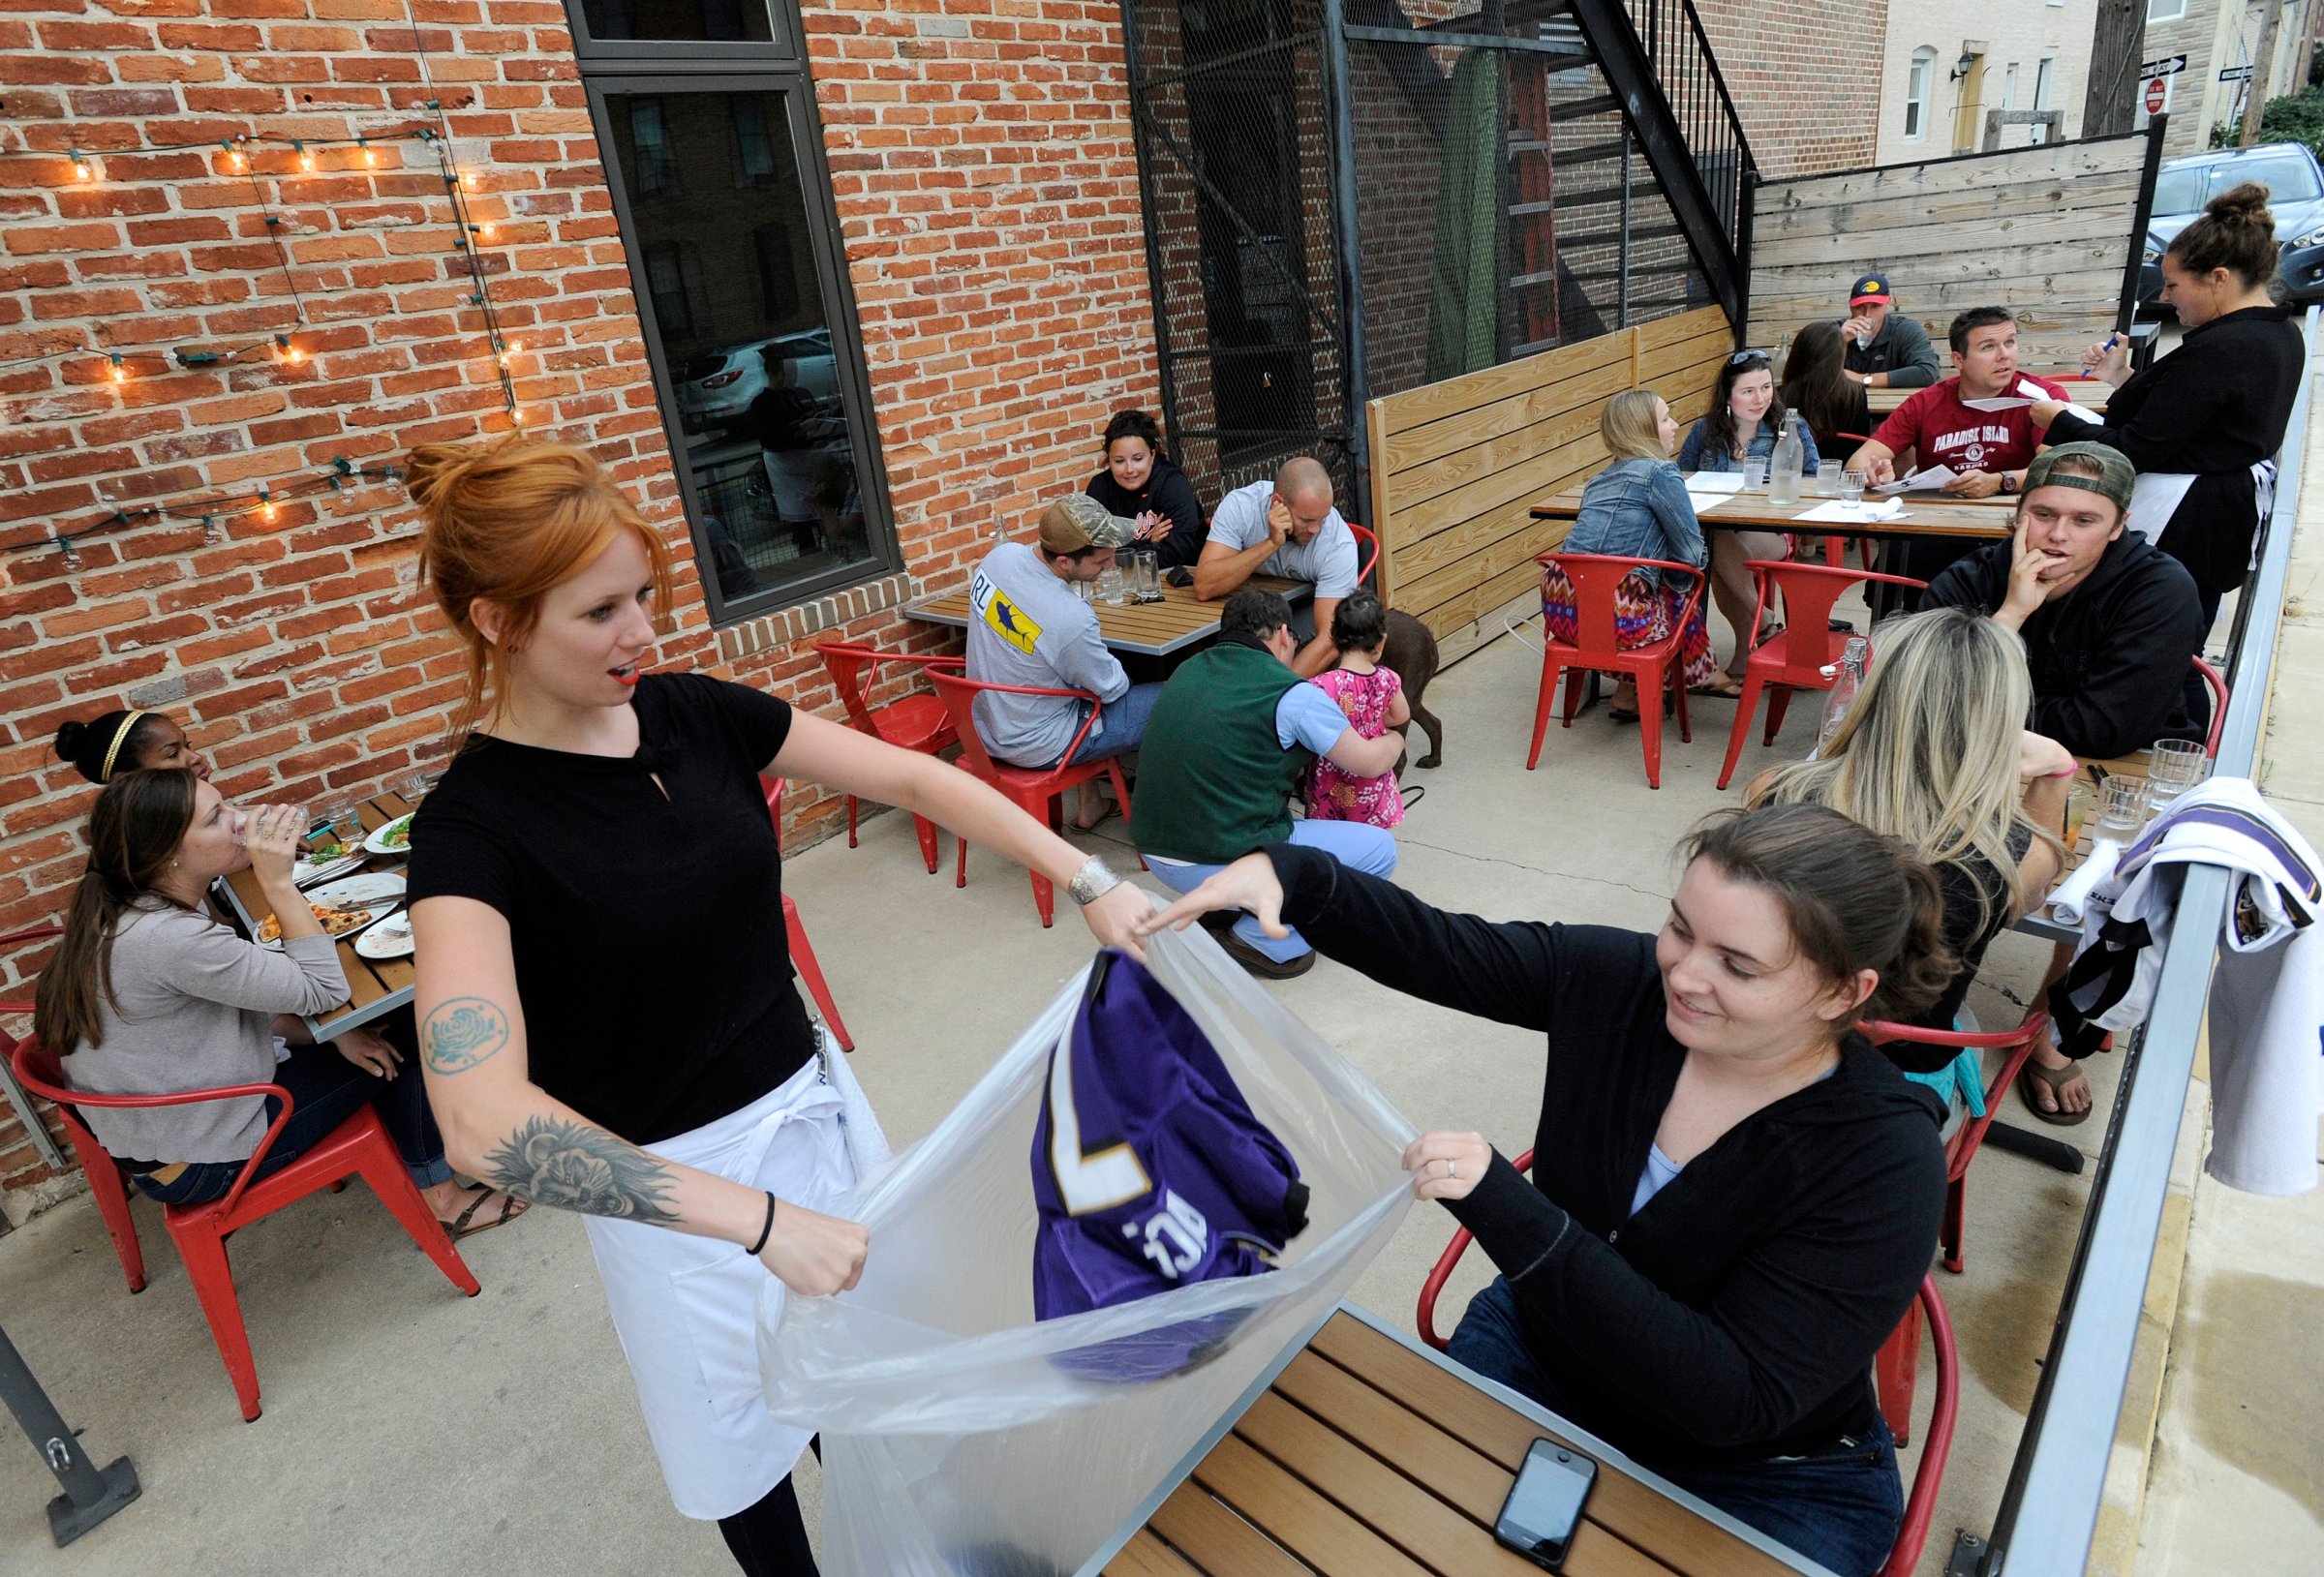 Bartender Abby Hopper, left, of Baltimore, collects a Ray Rice Baltimore Ravens football jersey from Erin McGonigle, right, of Arbutus, Md., at Hersh's Pizza and Drinks, a Baltimore restaurant that offered a free personal pizza in exchange for Rice jerseys on Sept. 8, 2014.